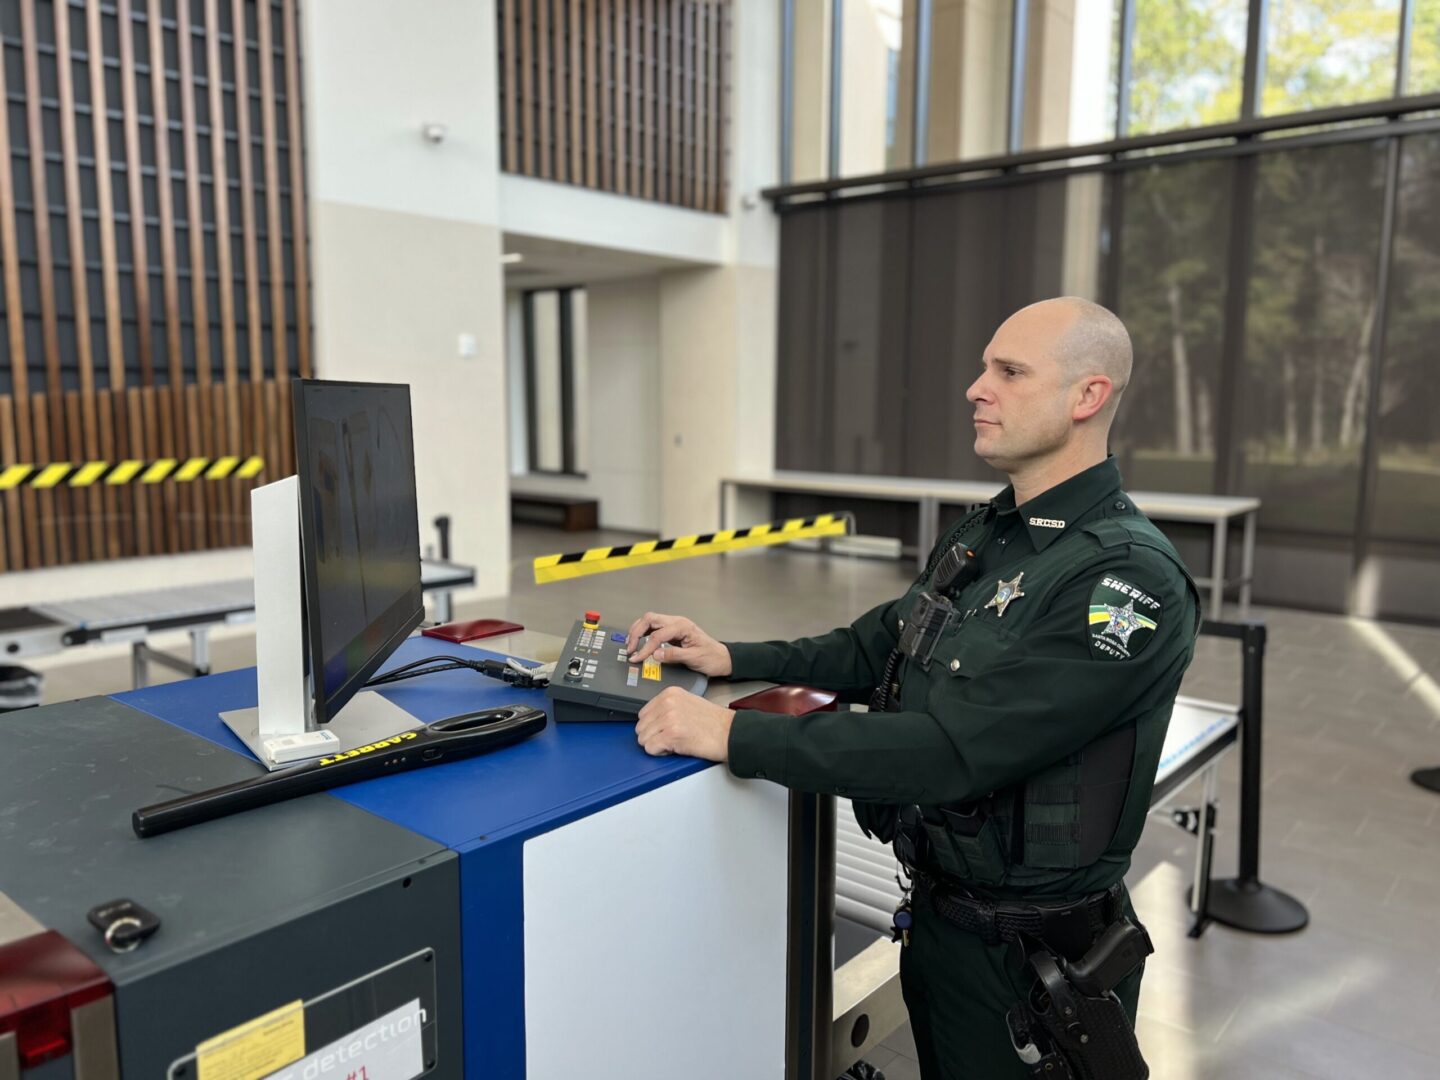 A sheriff's deputy operating a security console in a modern building lobby.